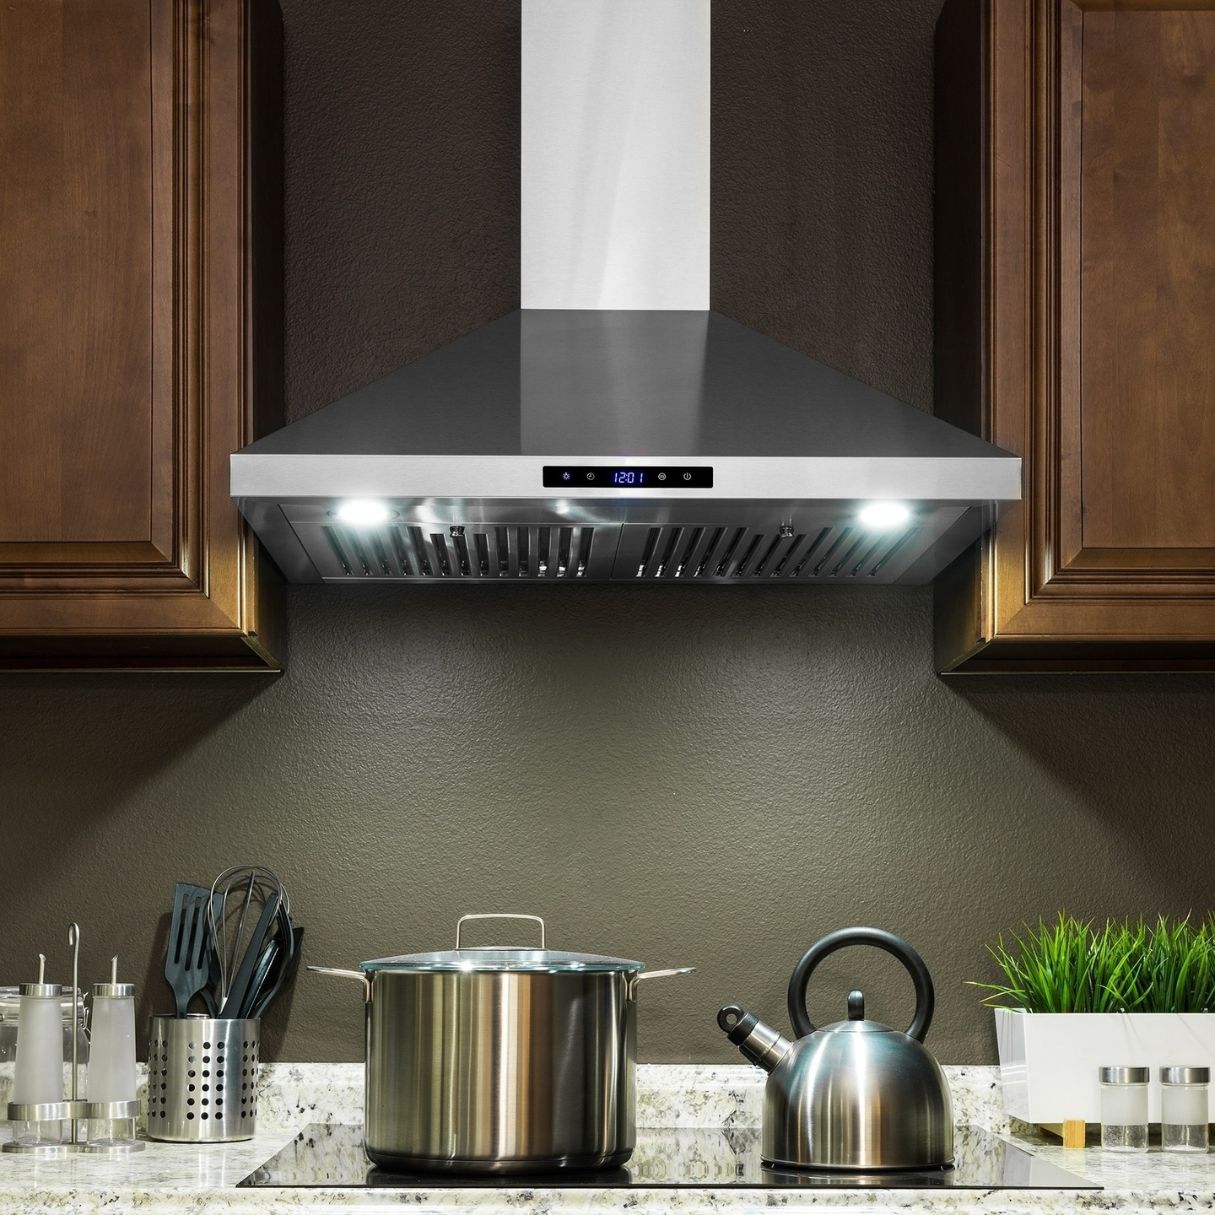 What Size Of Range Hood I Need For A 36 Inch Range